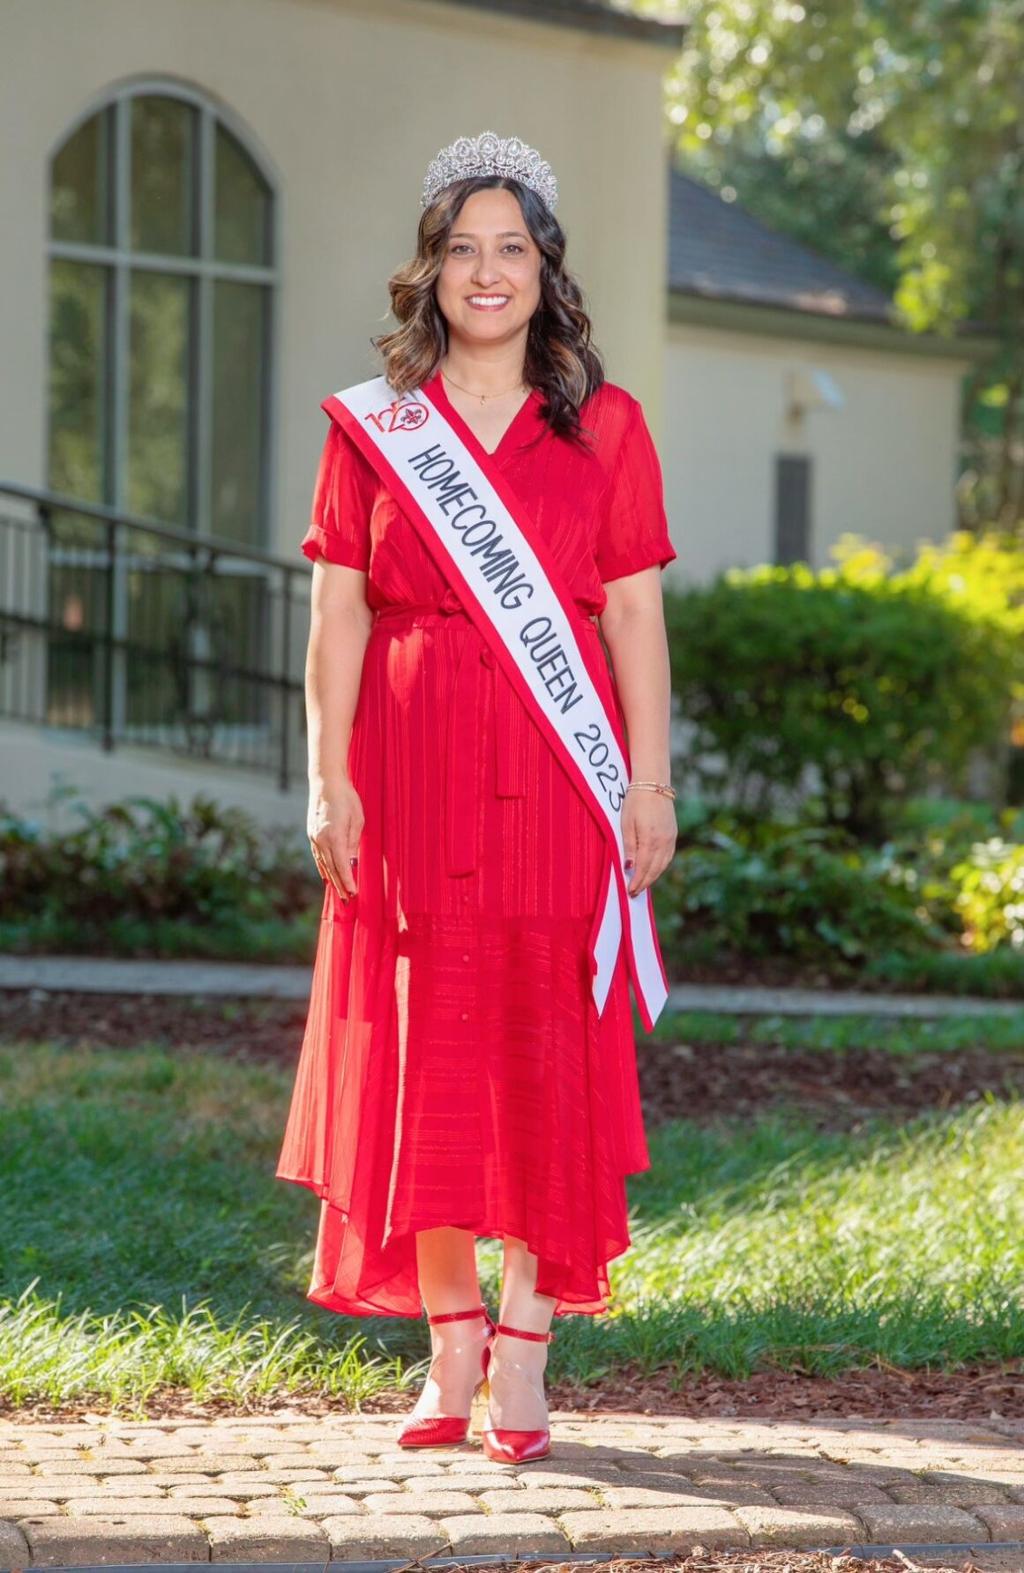 The 2023 UL Homecoming Queen is a full-time mom and graduate student from  Pakistan., Entertainment/Life